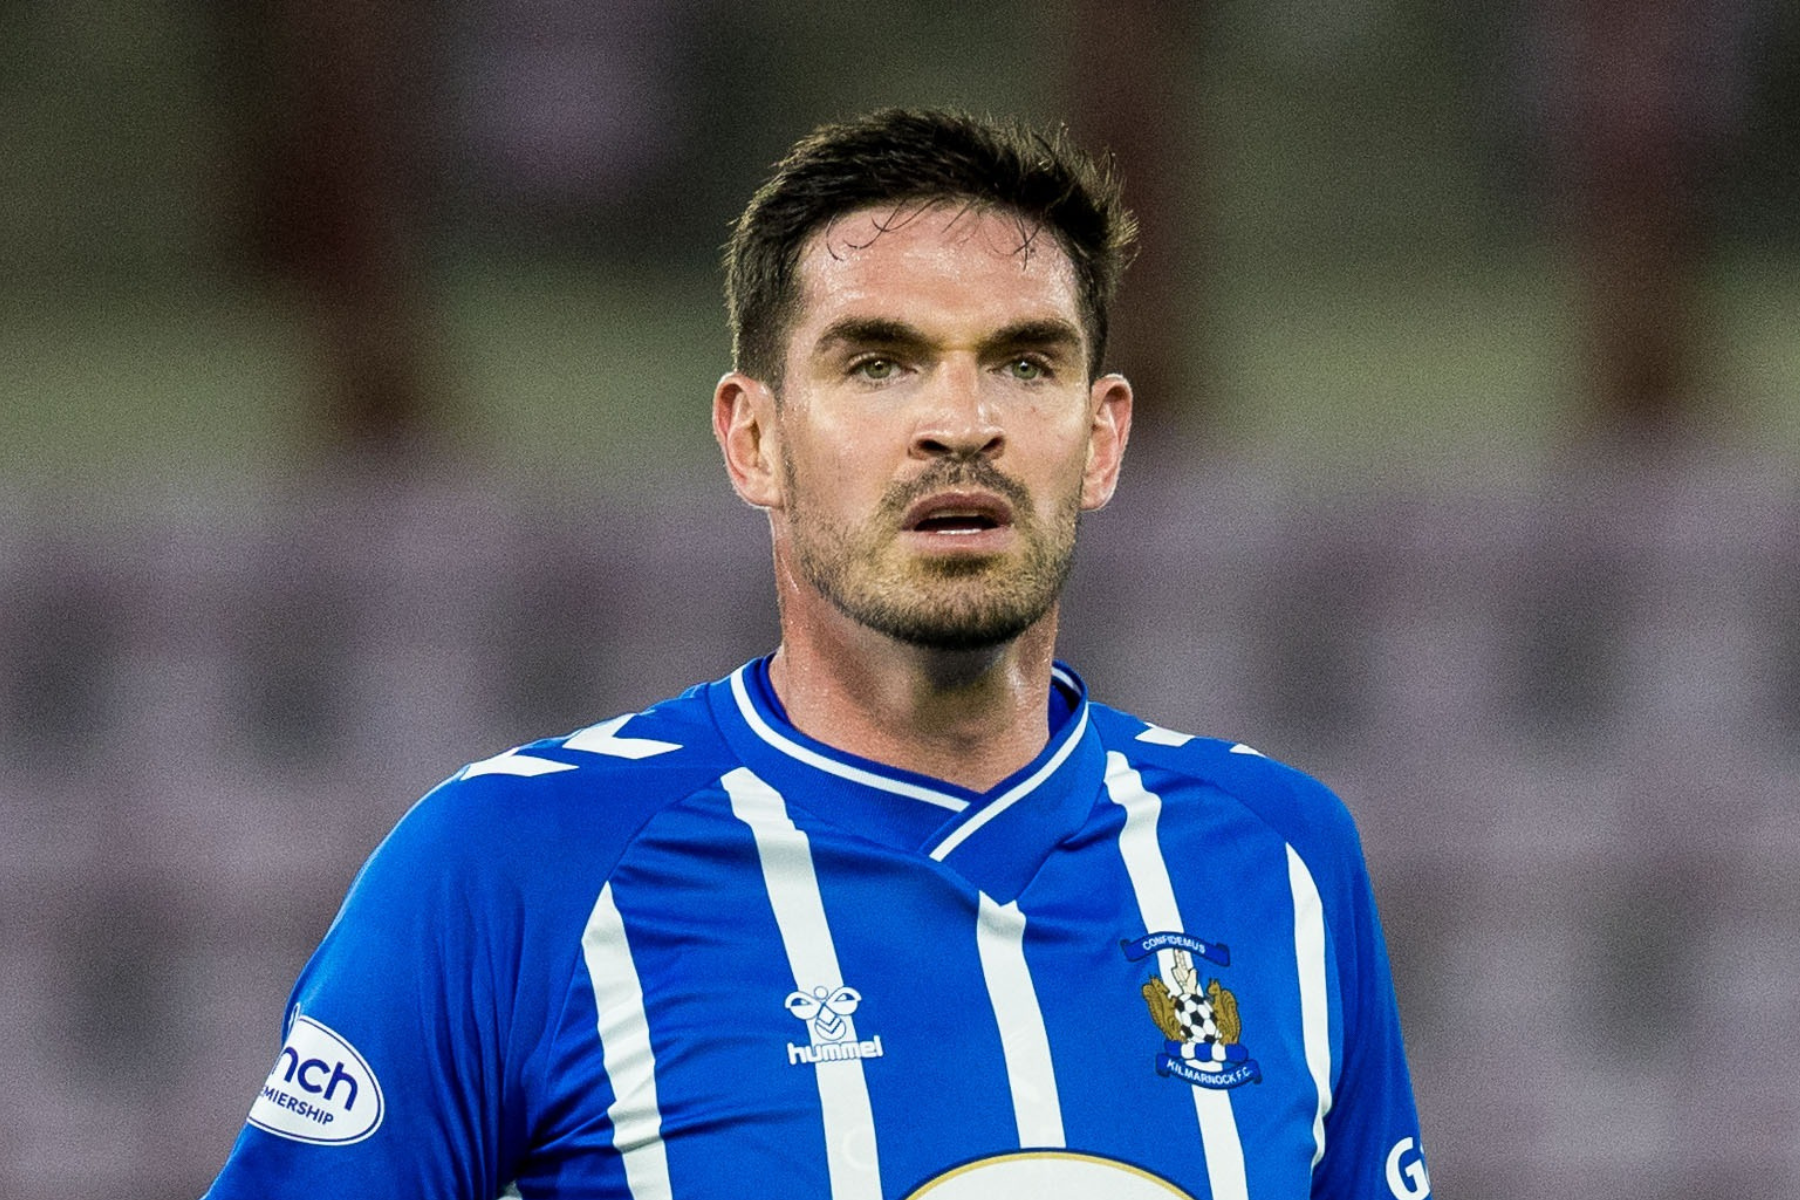 Kyle Lafferty 'to be axed' from Northern Ireland squad amid investigation into 'sectarian' remarks